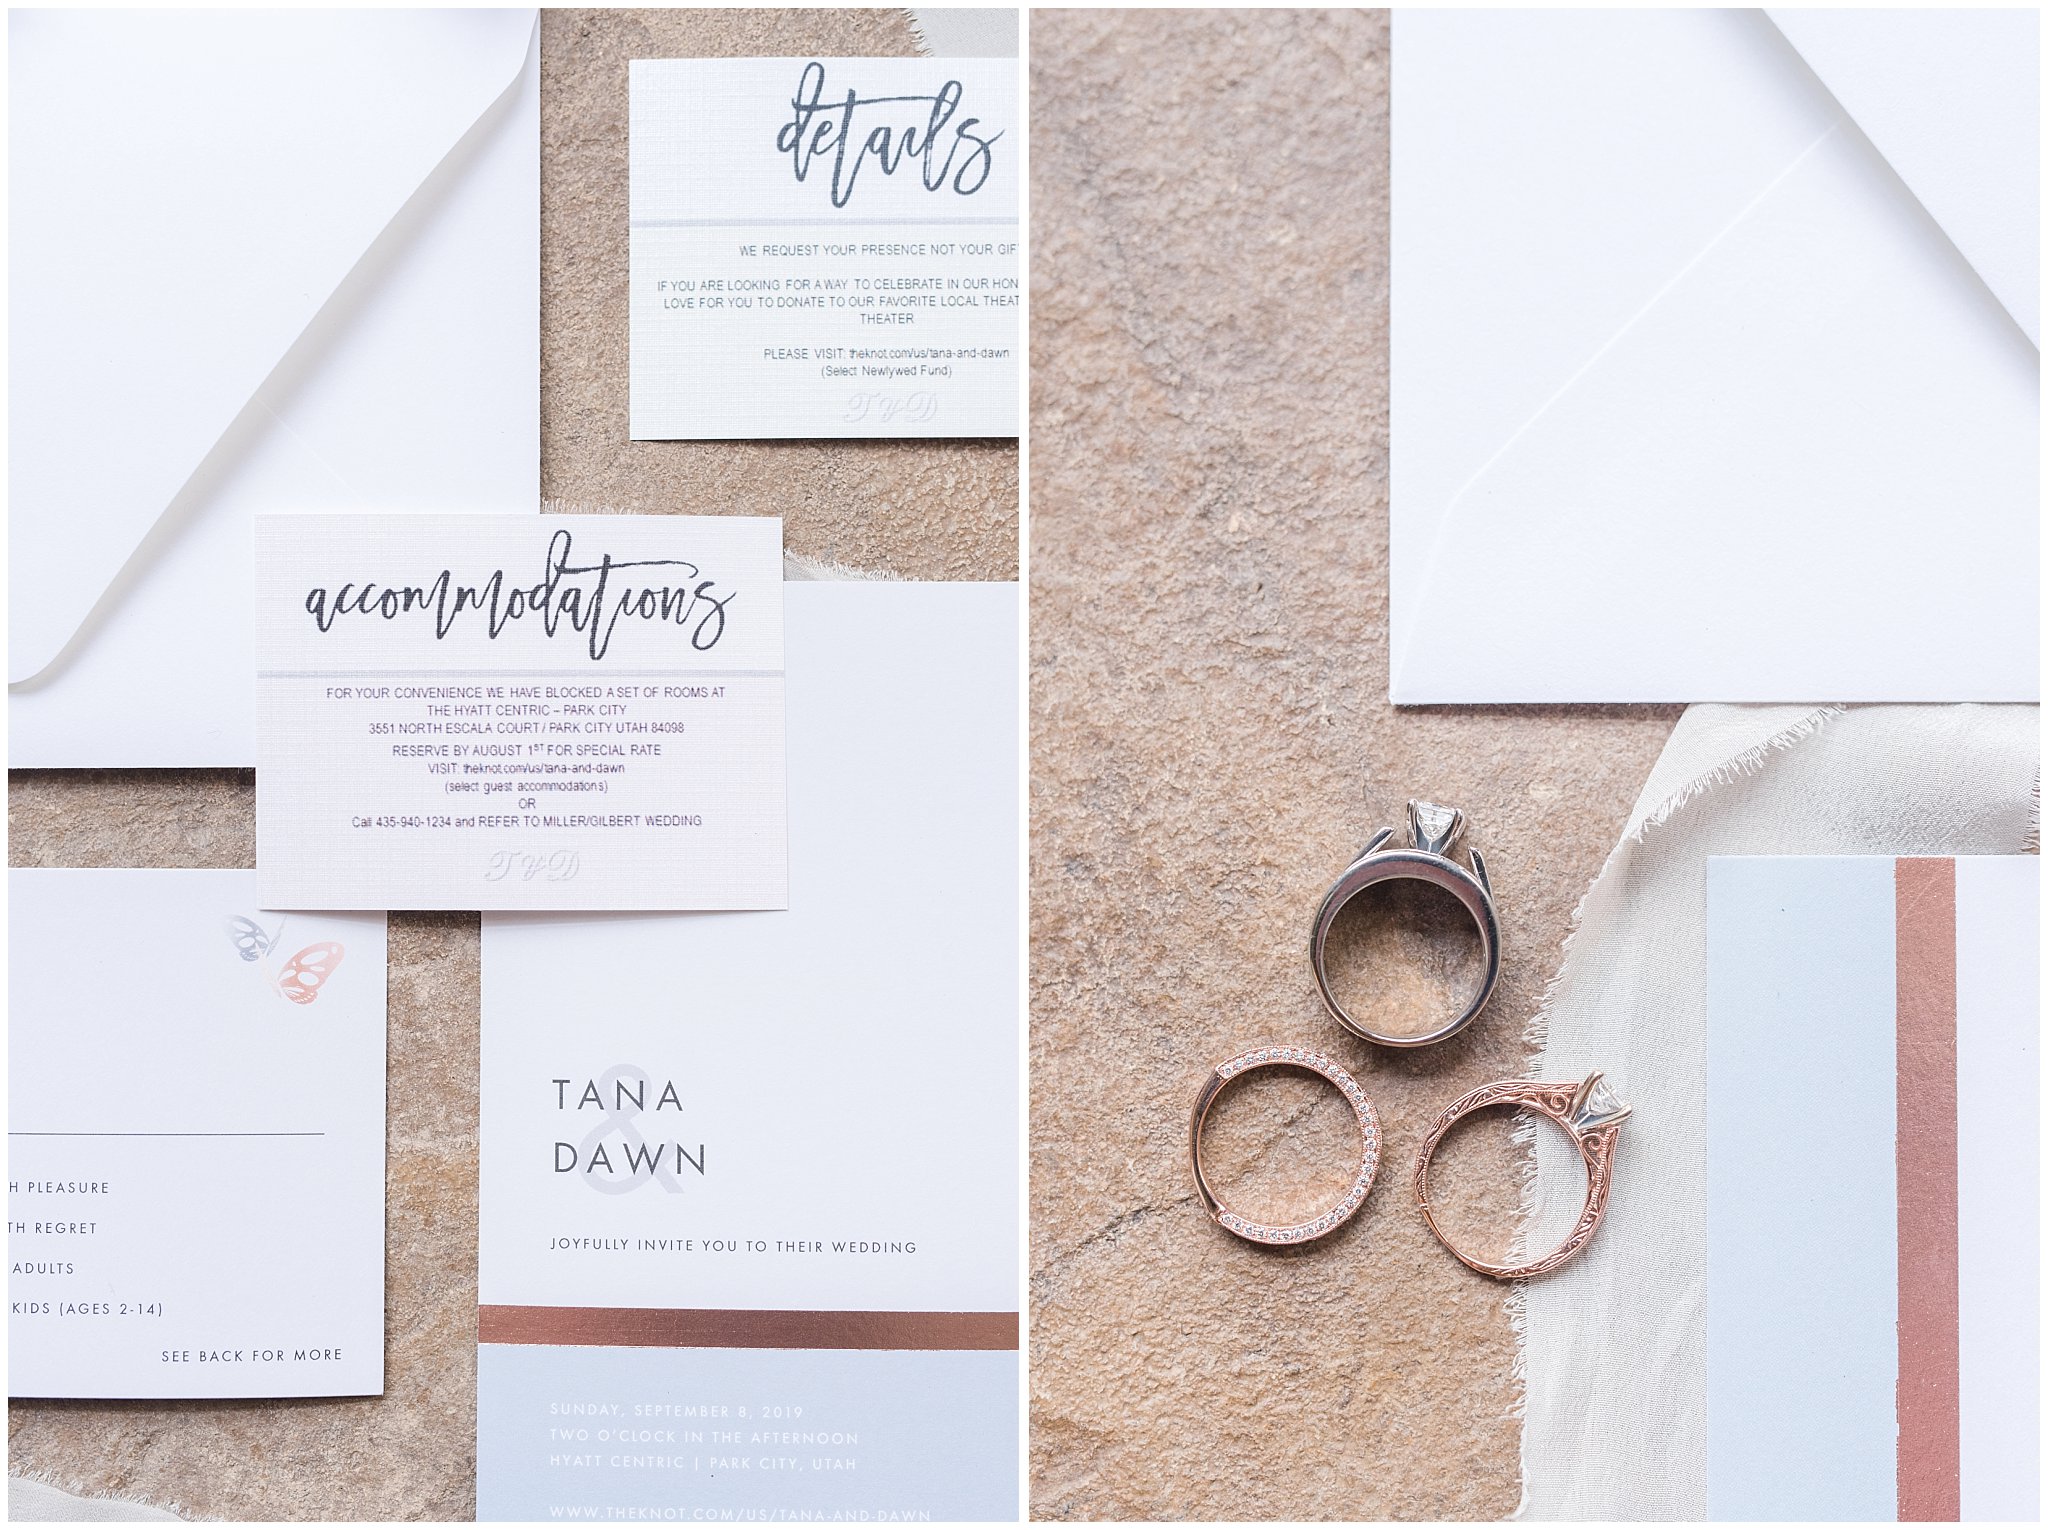 Invitation suite on stone with wedding rings | Park City Wedding at the Hyatt Centric | Jessie and Dallin Photography